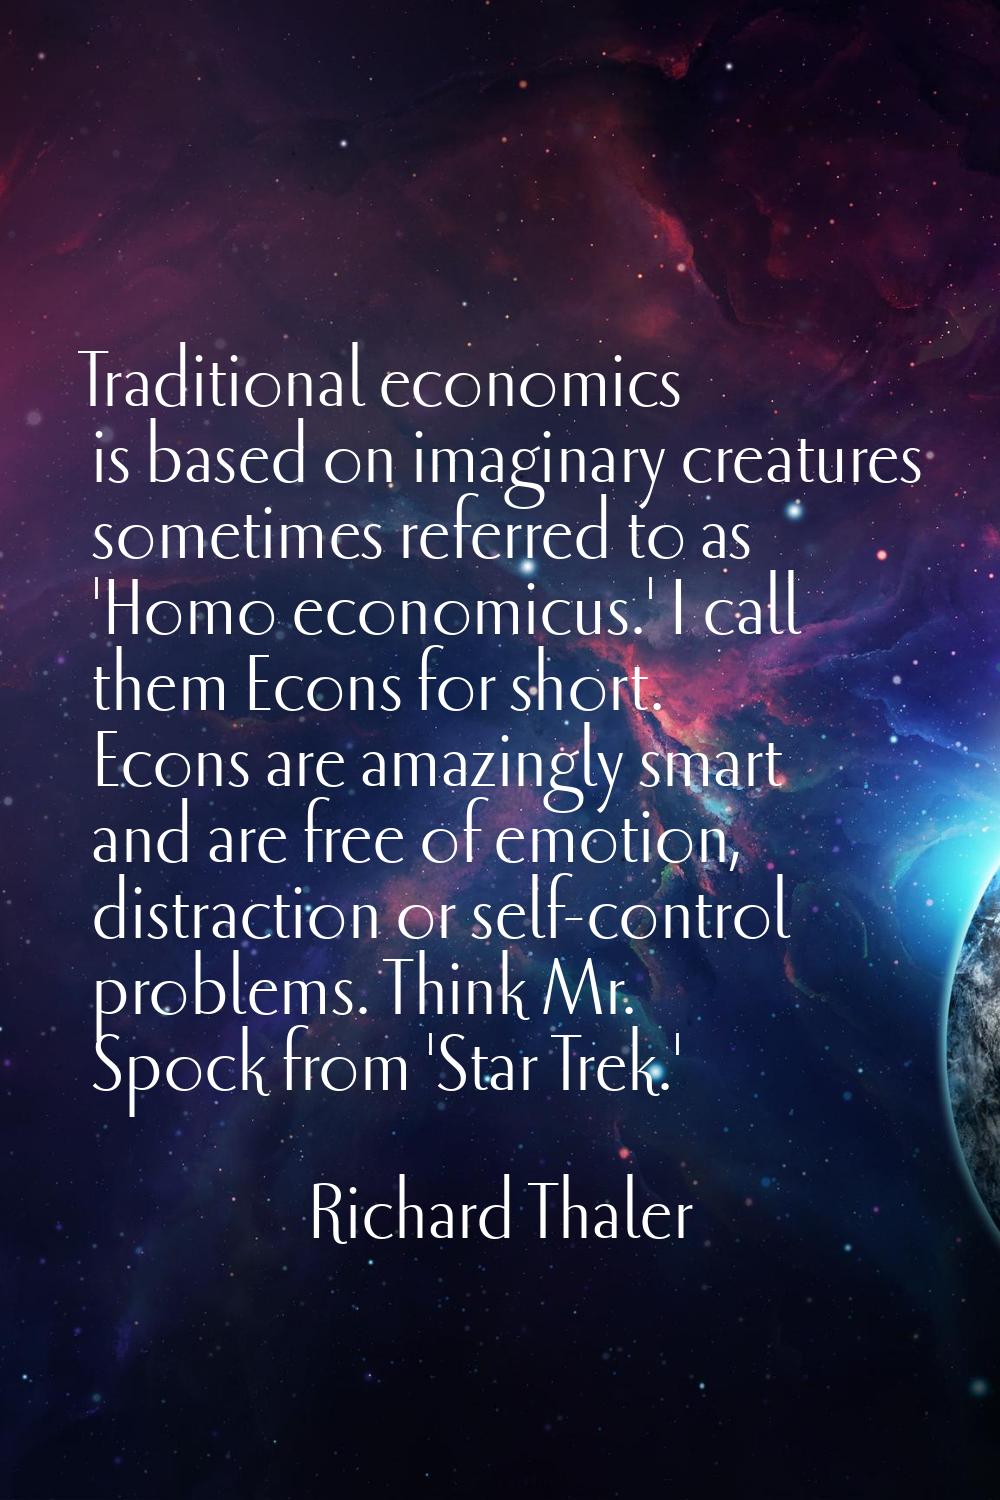 Traditional economics is based on imaginary creatures sometimes referred to as 'Homo economicus.' I